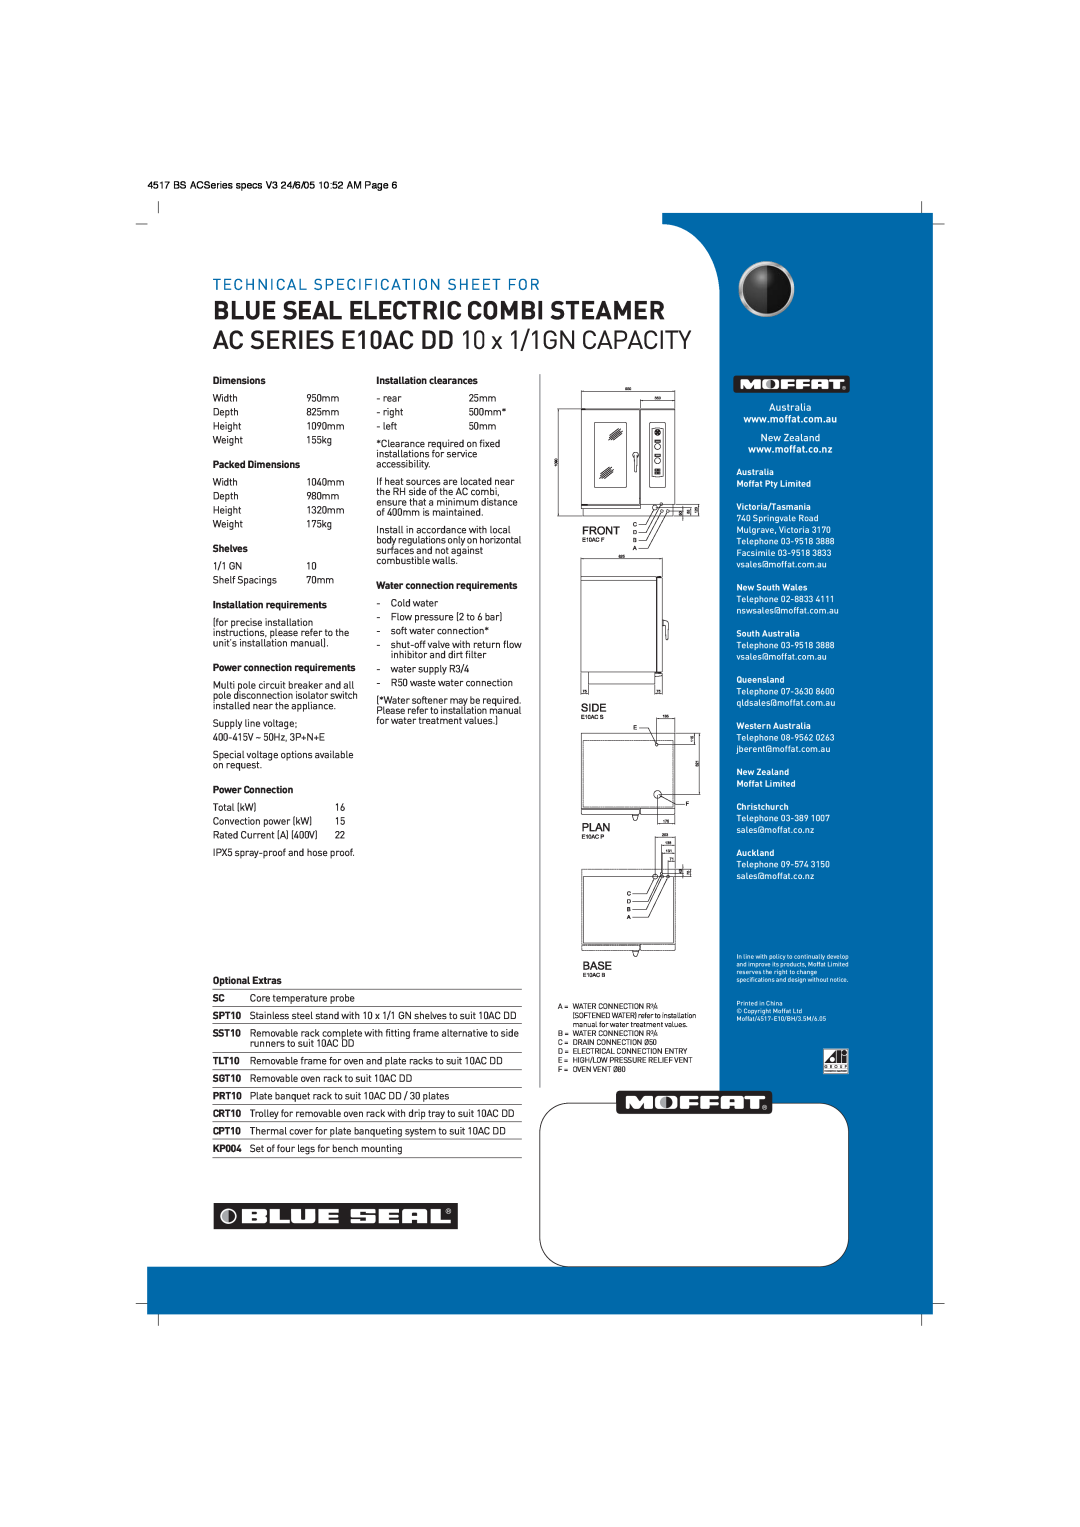 Moffat Blue Seal Electric Combi Steamer, AC SERIES E10AC DD 10 x 1/1GN CAPACITY, Technical Specification Sheet For 